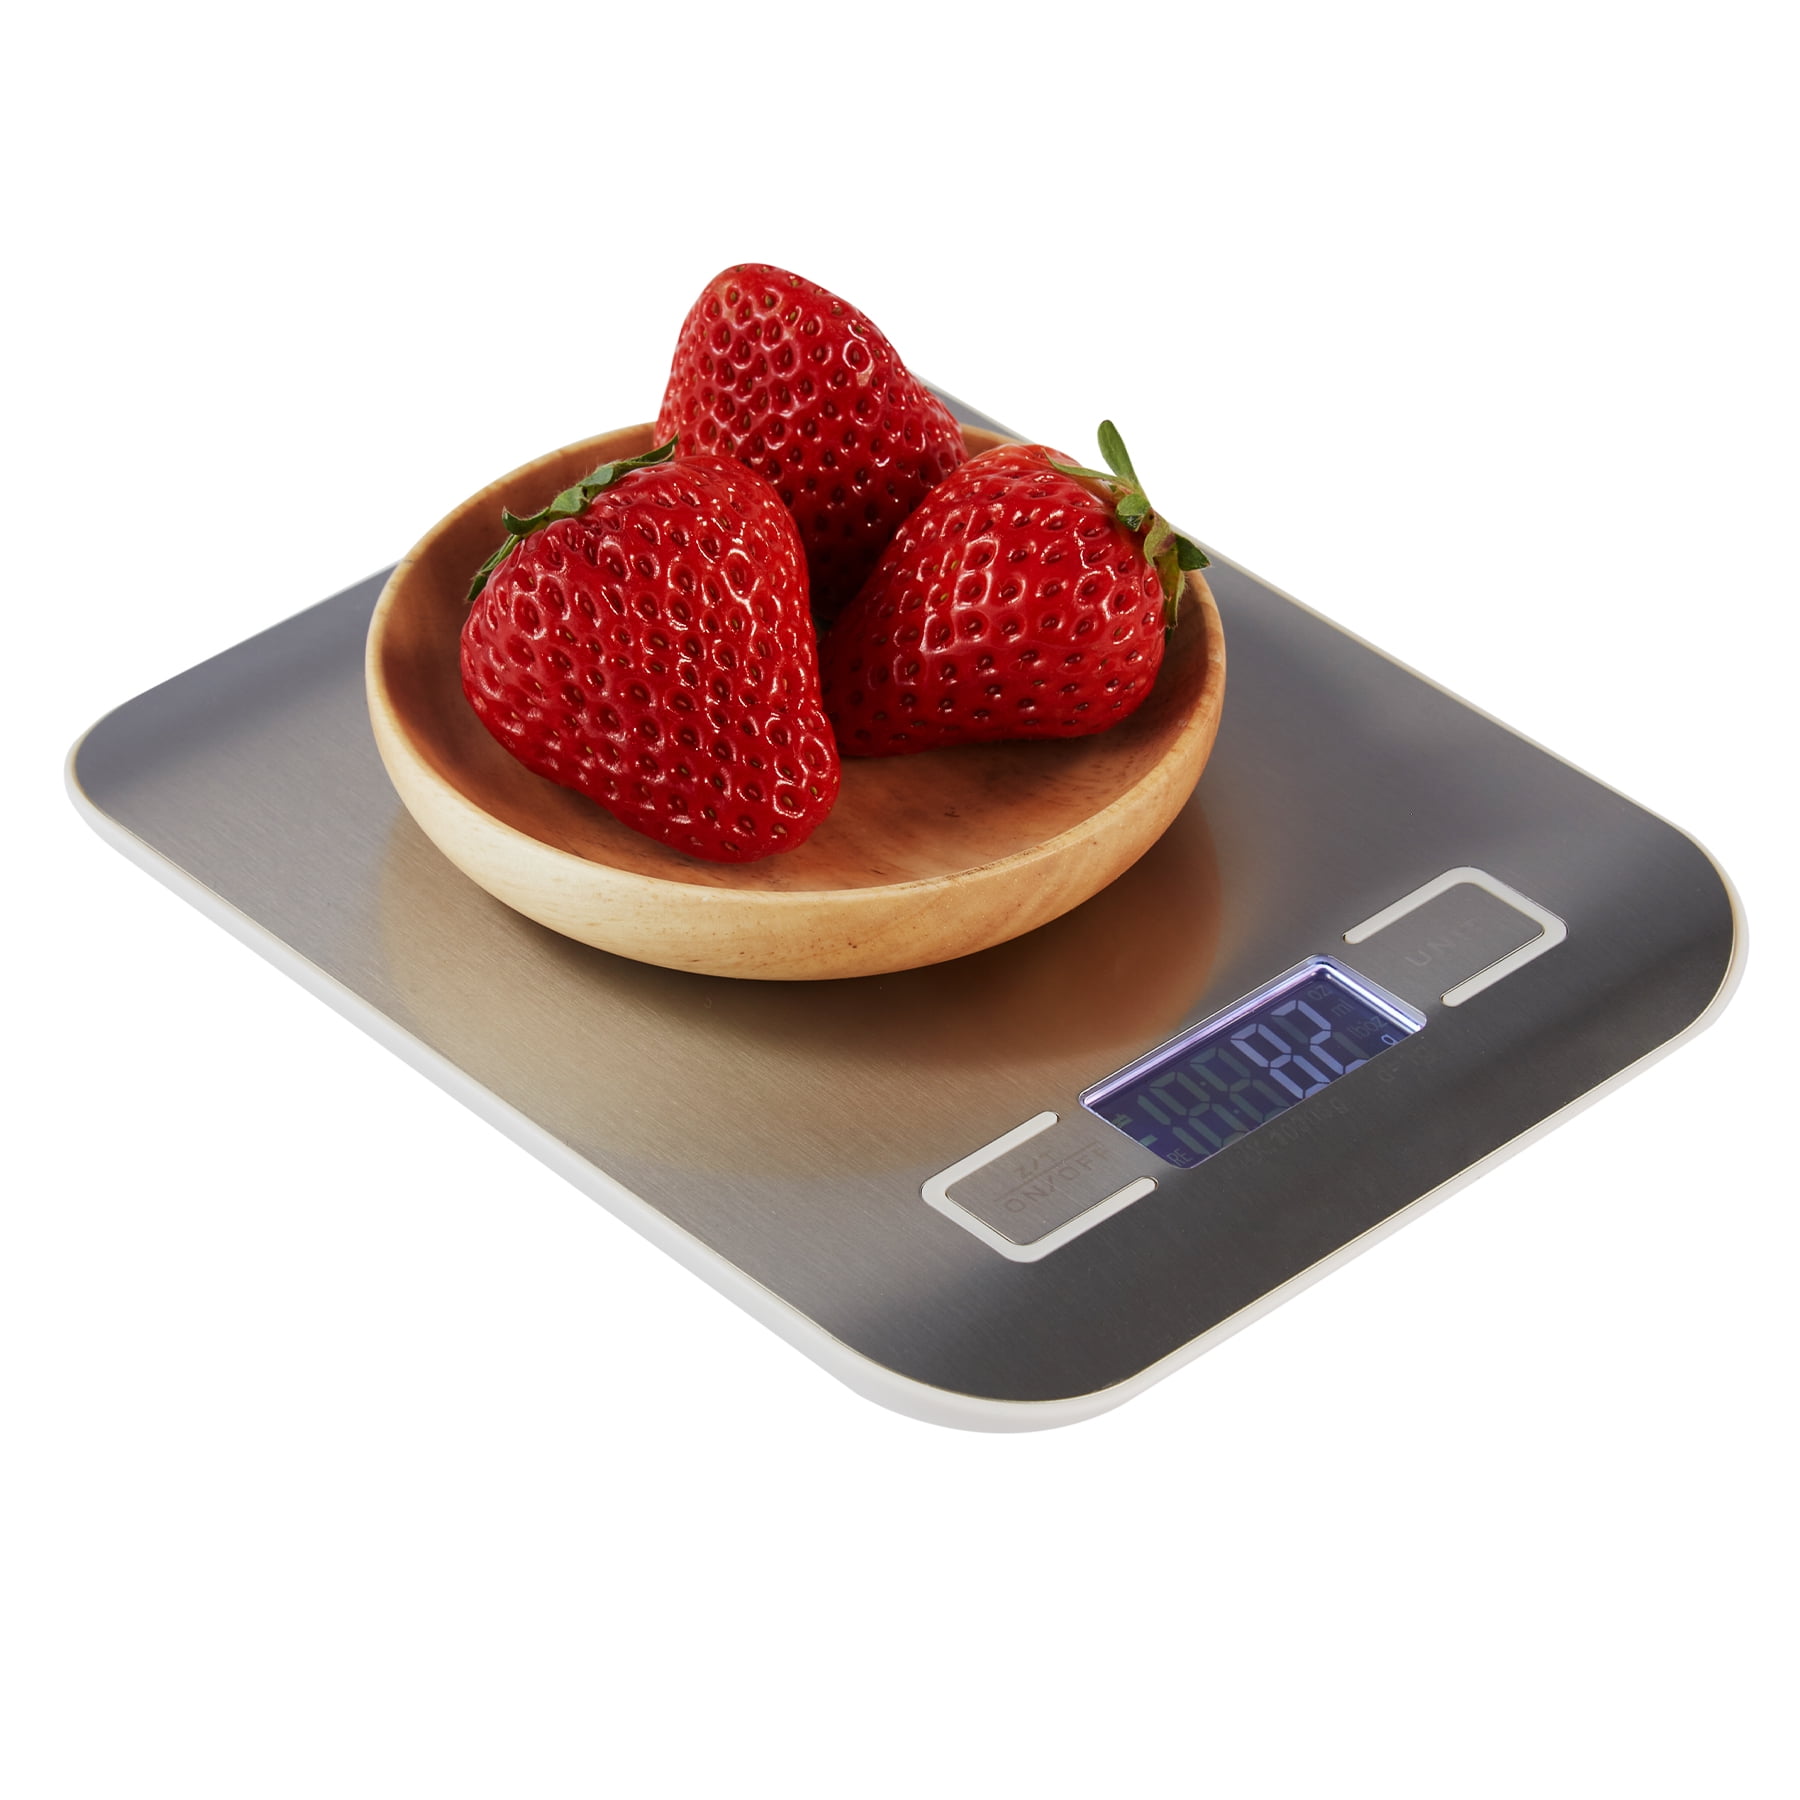 Mllieroo Digital Kitchen Scale Multifunction Food Scale, 11 lb 5 kg,LCD Display, Stainless Steel Silver, Size: 7.1” X5.5” x0.7”